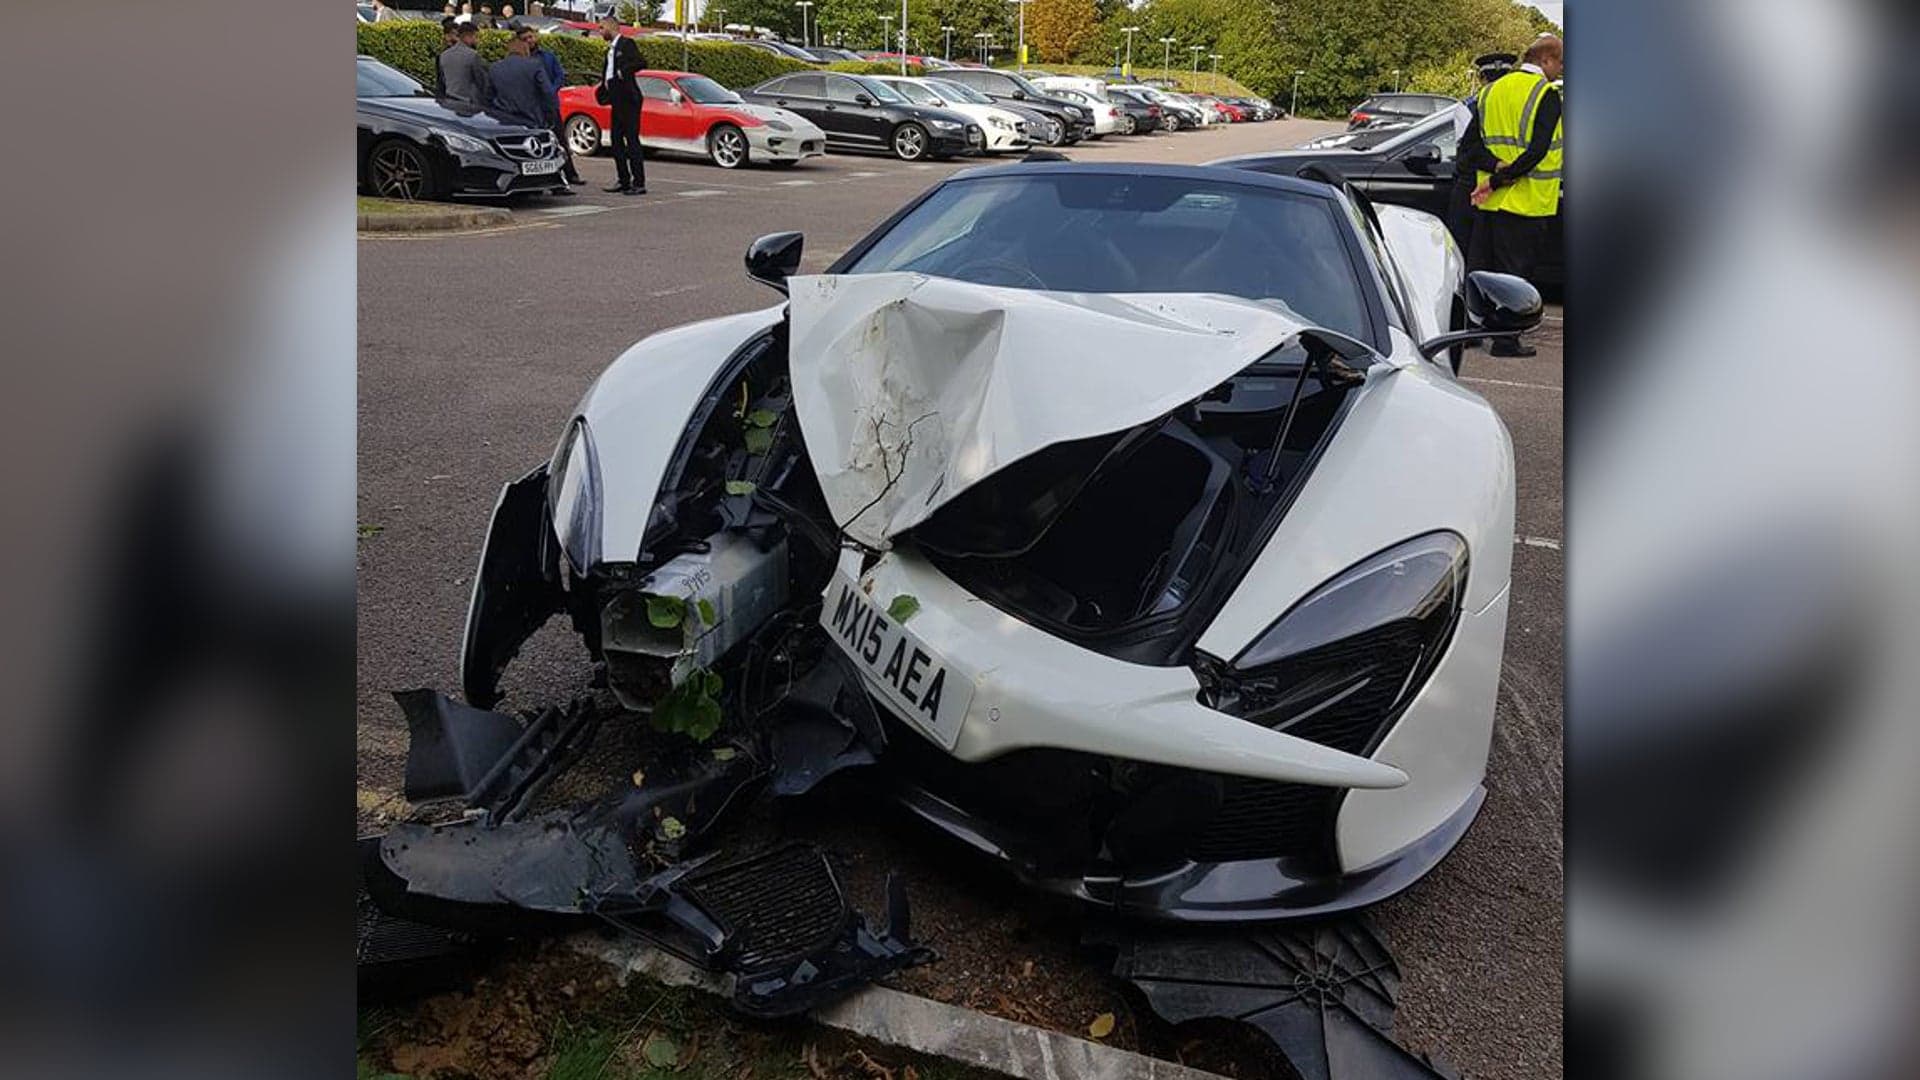 Using Launch Control in a McLaren 650S in a Parking Lot is a Very, Very Bad Idea